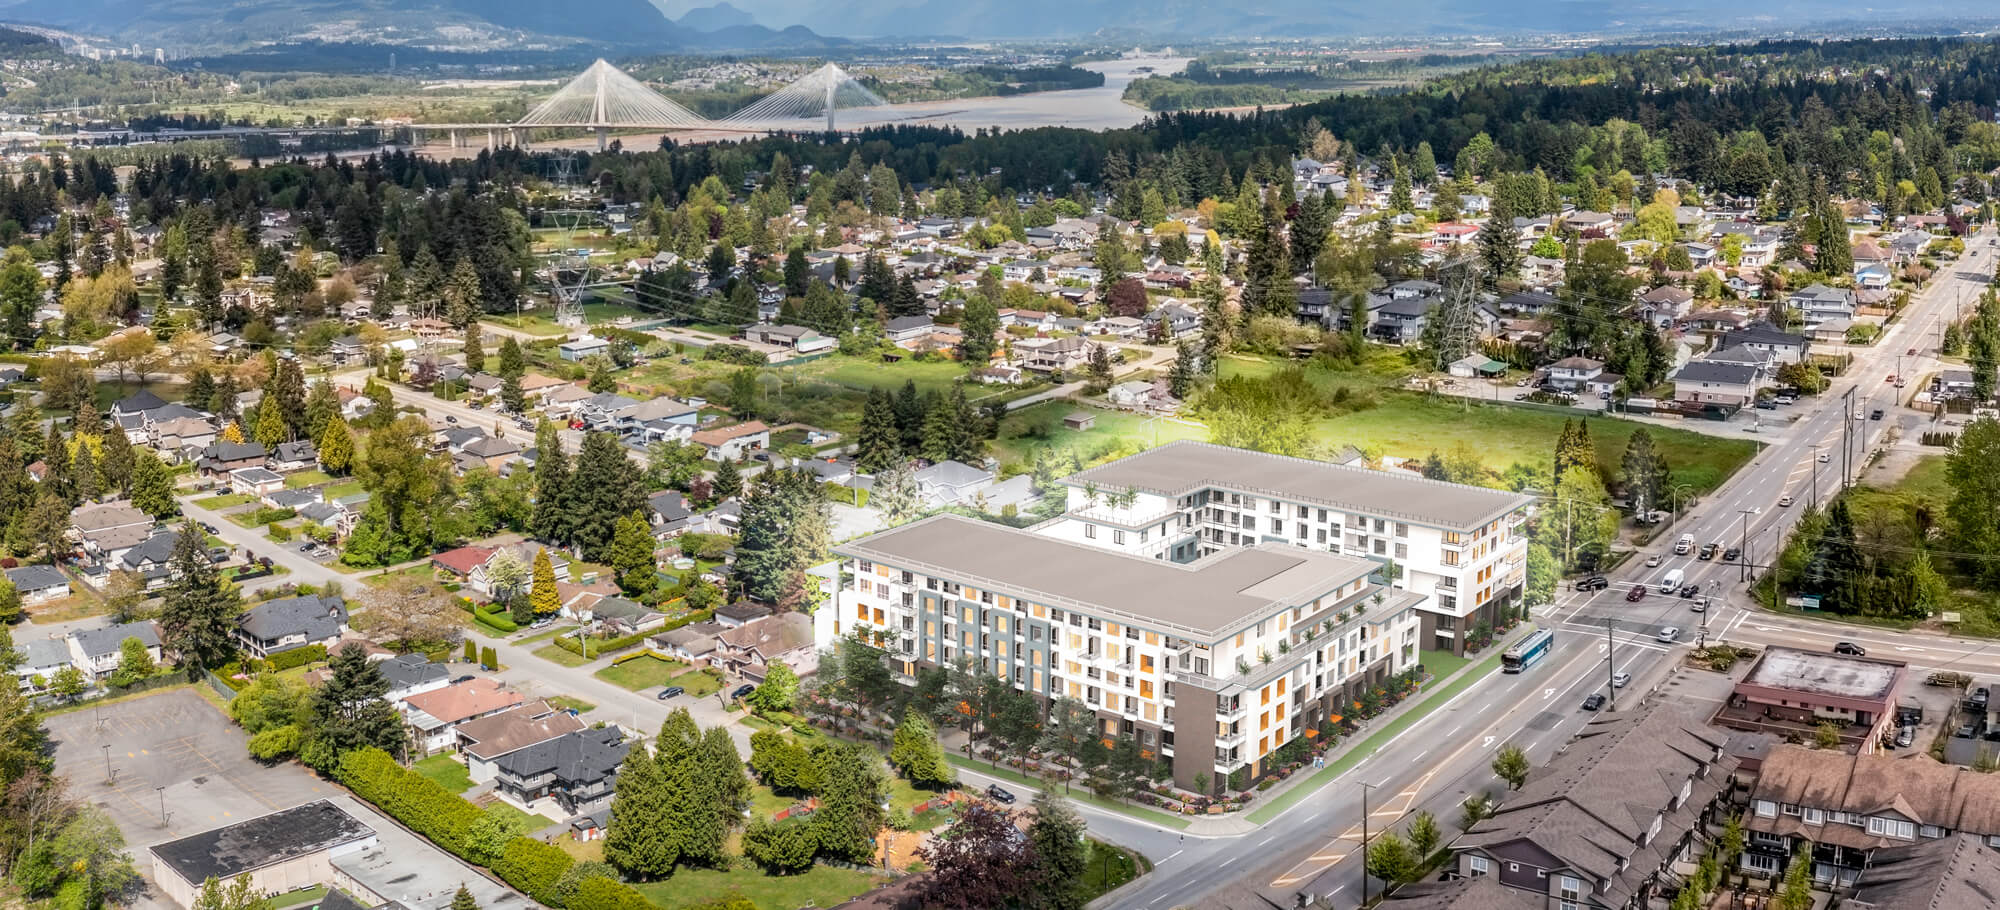 The ‘Viktor’ development is a 6-storey residential condo project in Surrey. Design by Group 161 | DF Architecture.